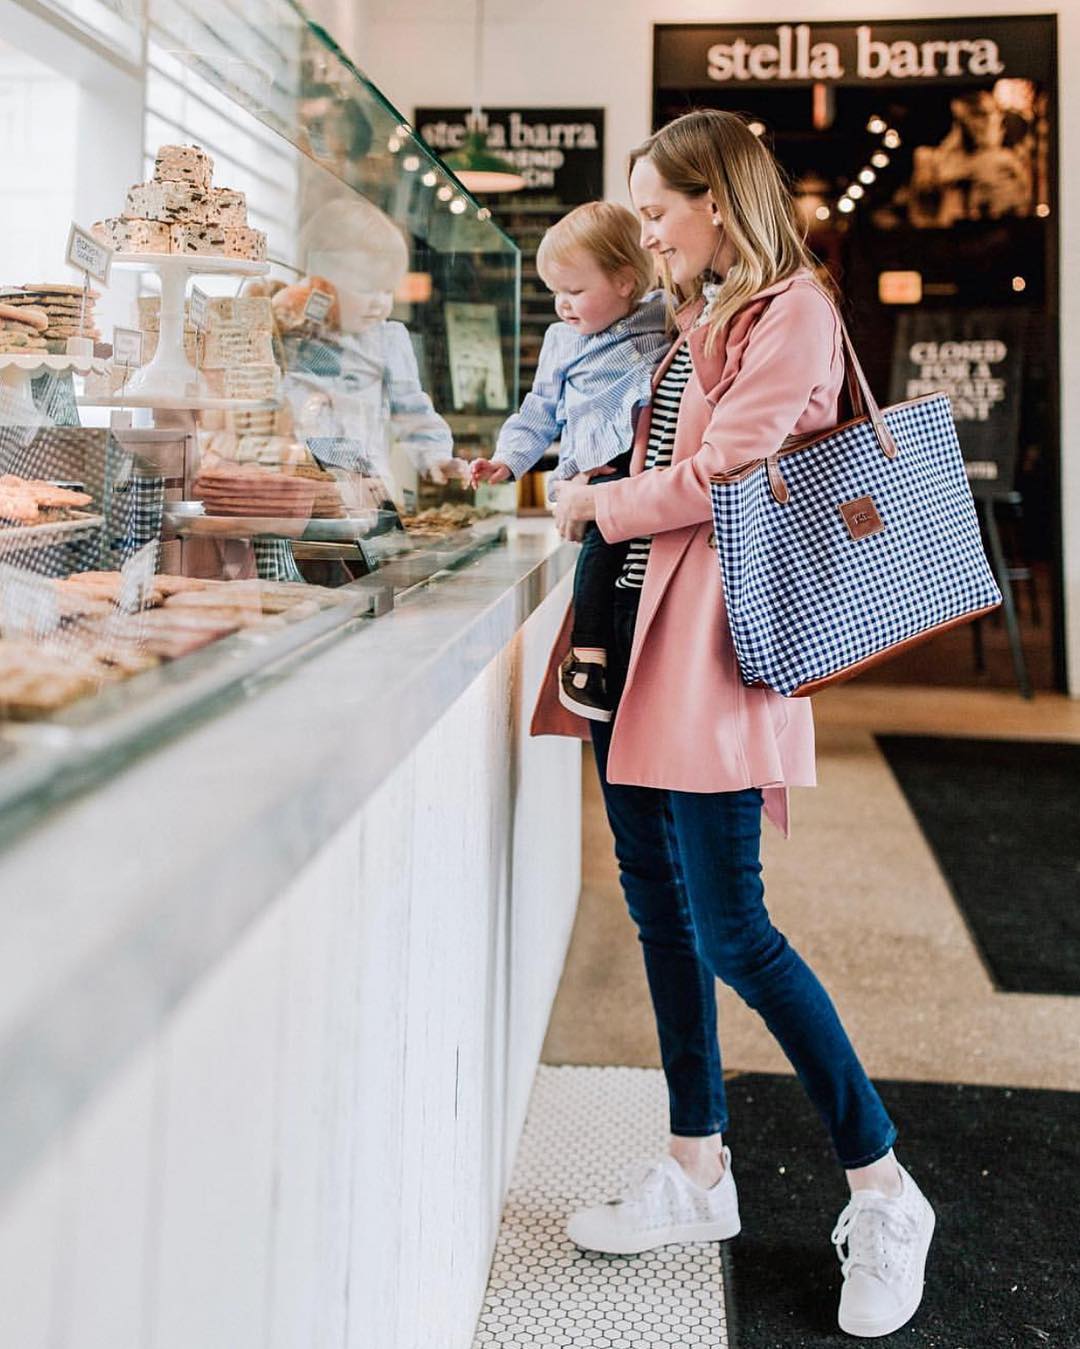 Charming moment of mother and child picking treats at a bakery with a blue checkered personalized handbag